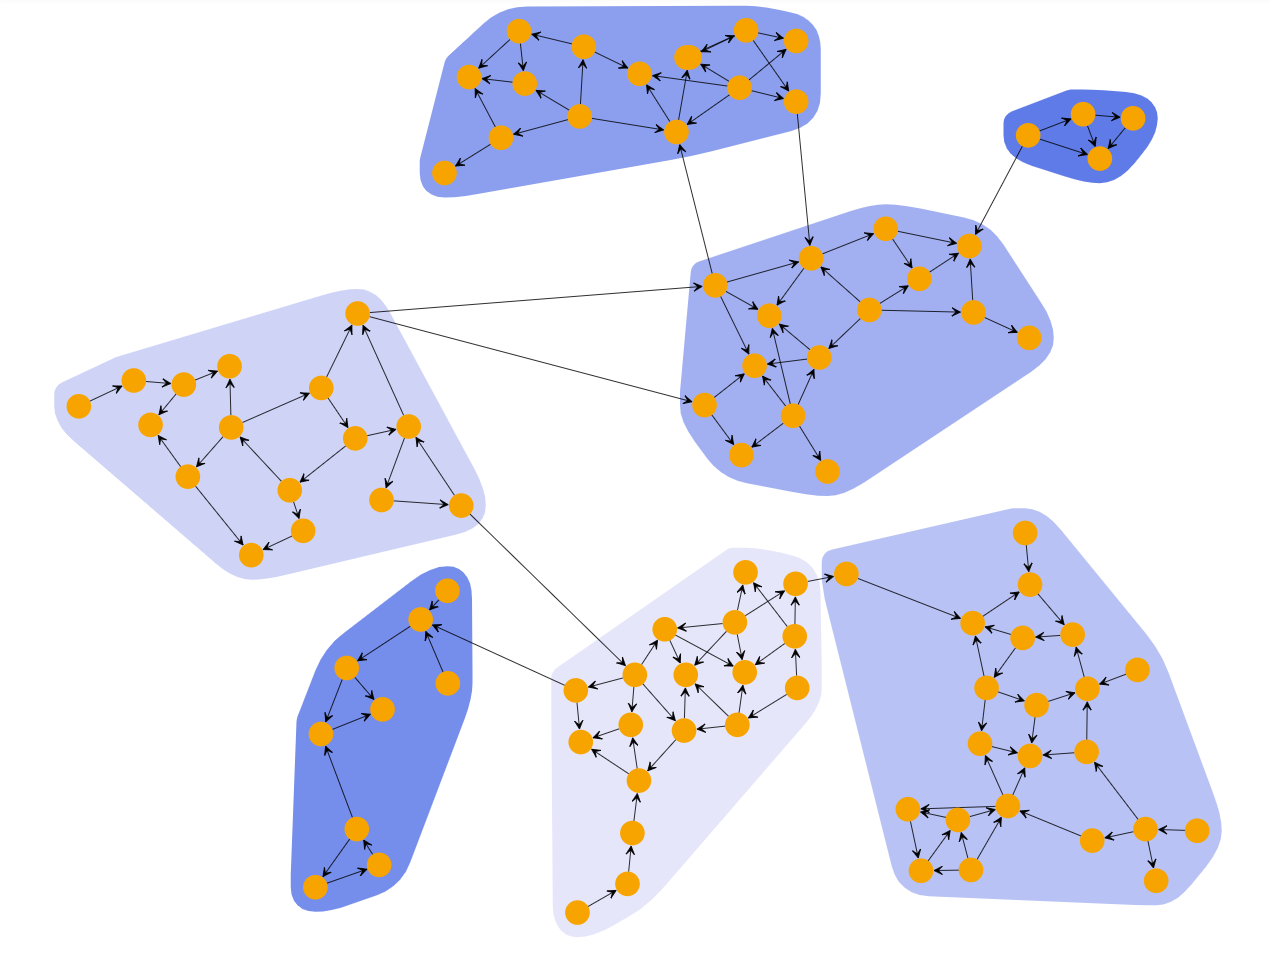 Clustering Graphs and Networks